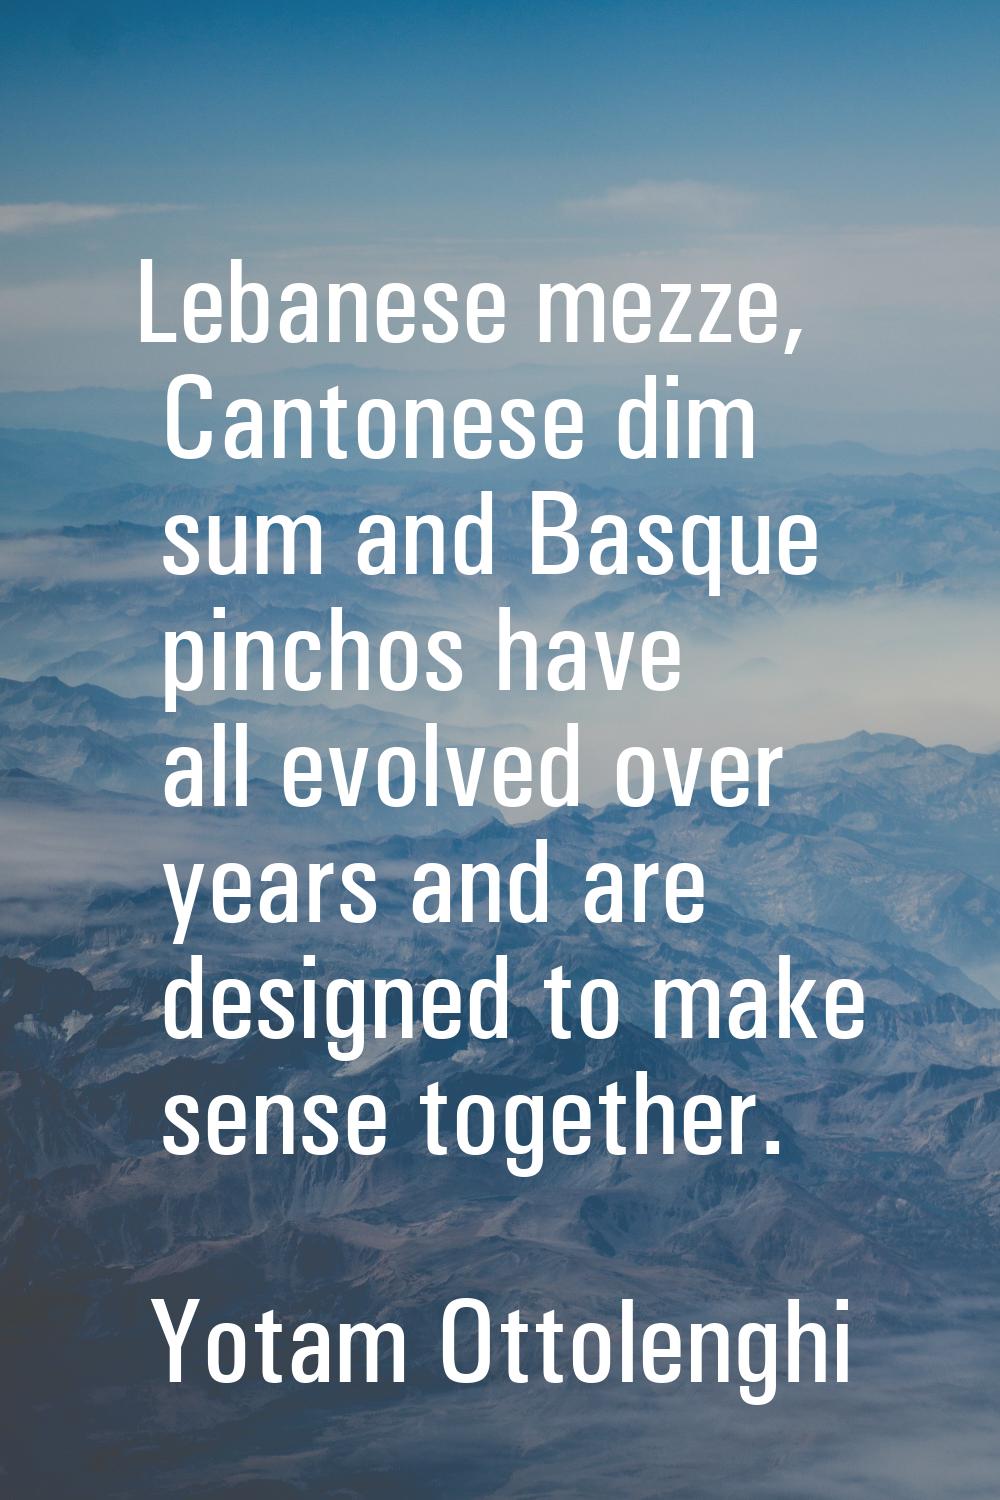 Lebanese mezze, Cantonese dim sum and Basque pinchos have all evolved over years and are designed t